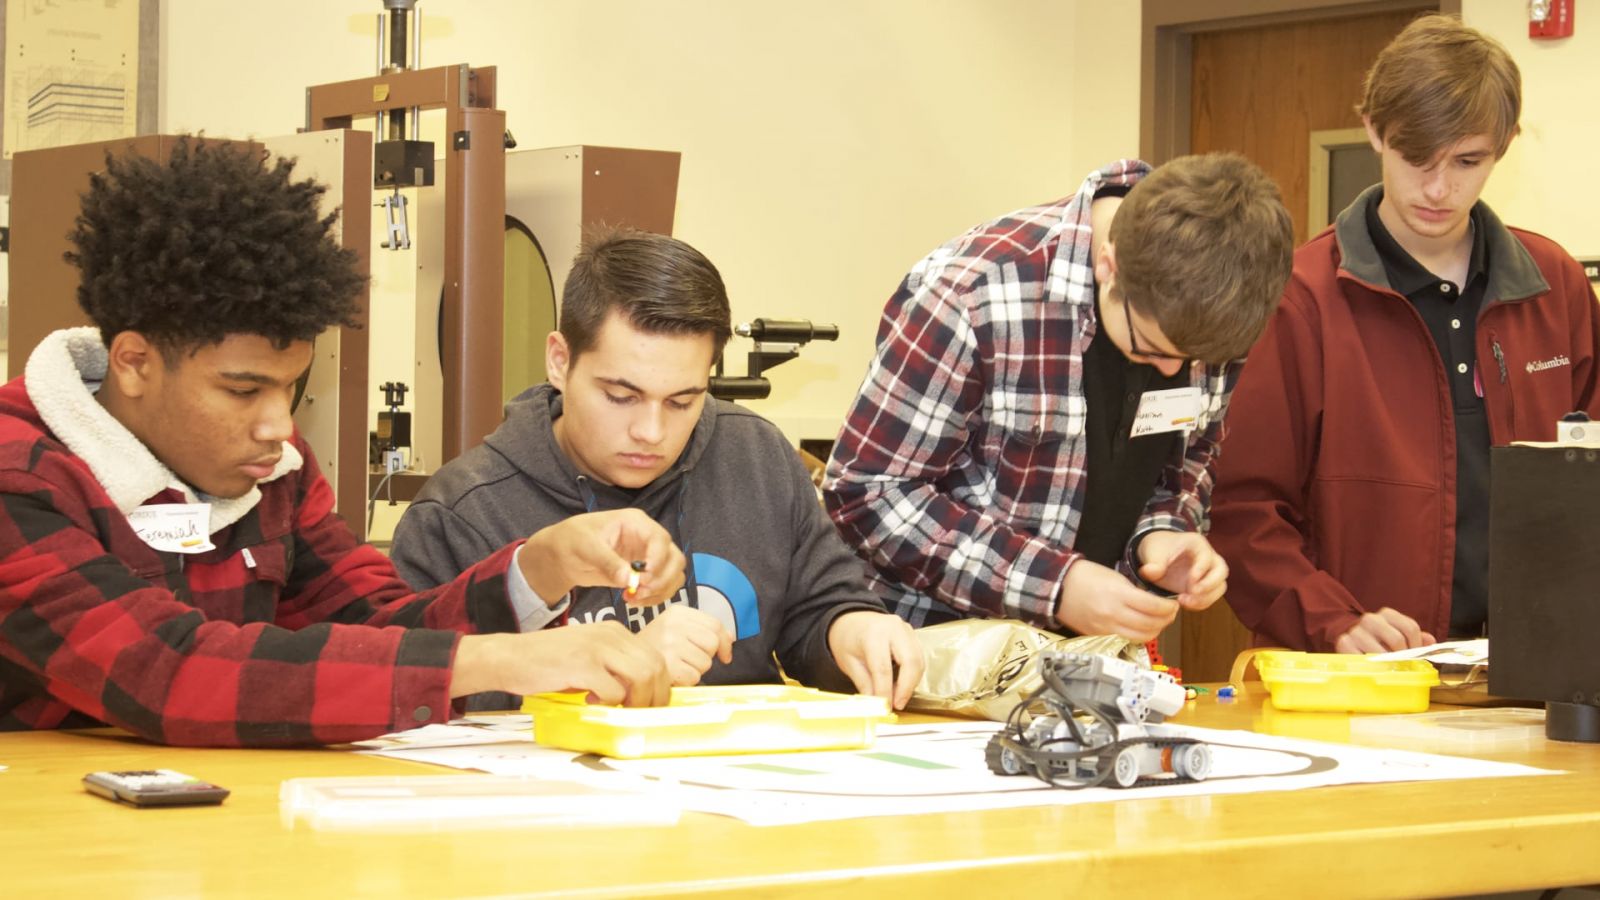 Students take on an engineering technology challenge during CLAIMiT camp